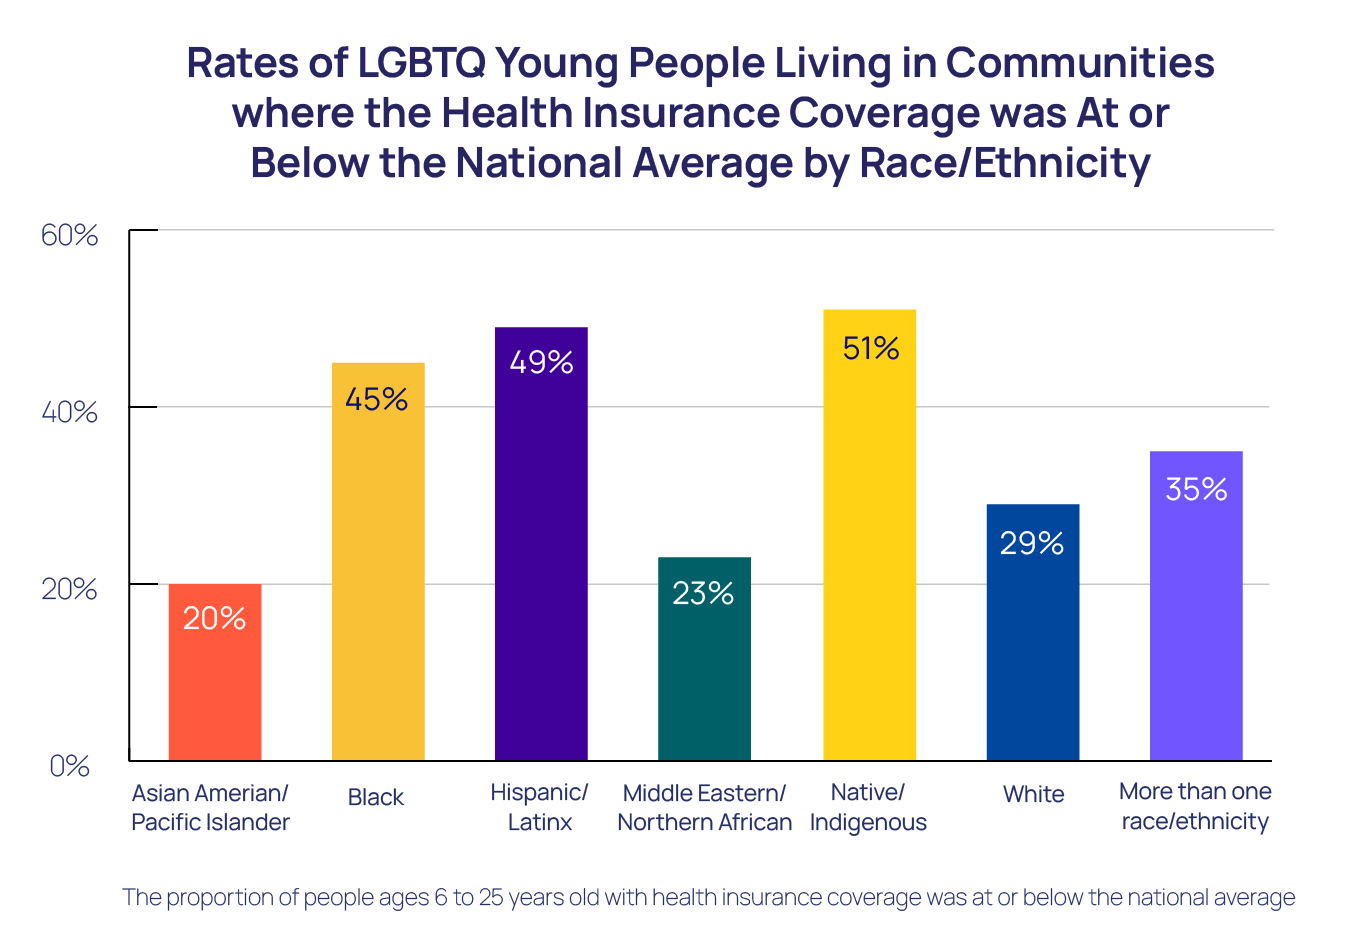 Rates of LGBTQ Young People Living in Communities where the Health Insurance Coverage was At or Below the National Average by Race/Etnicity Bar Chart